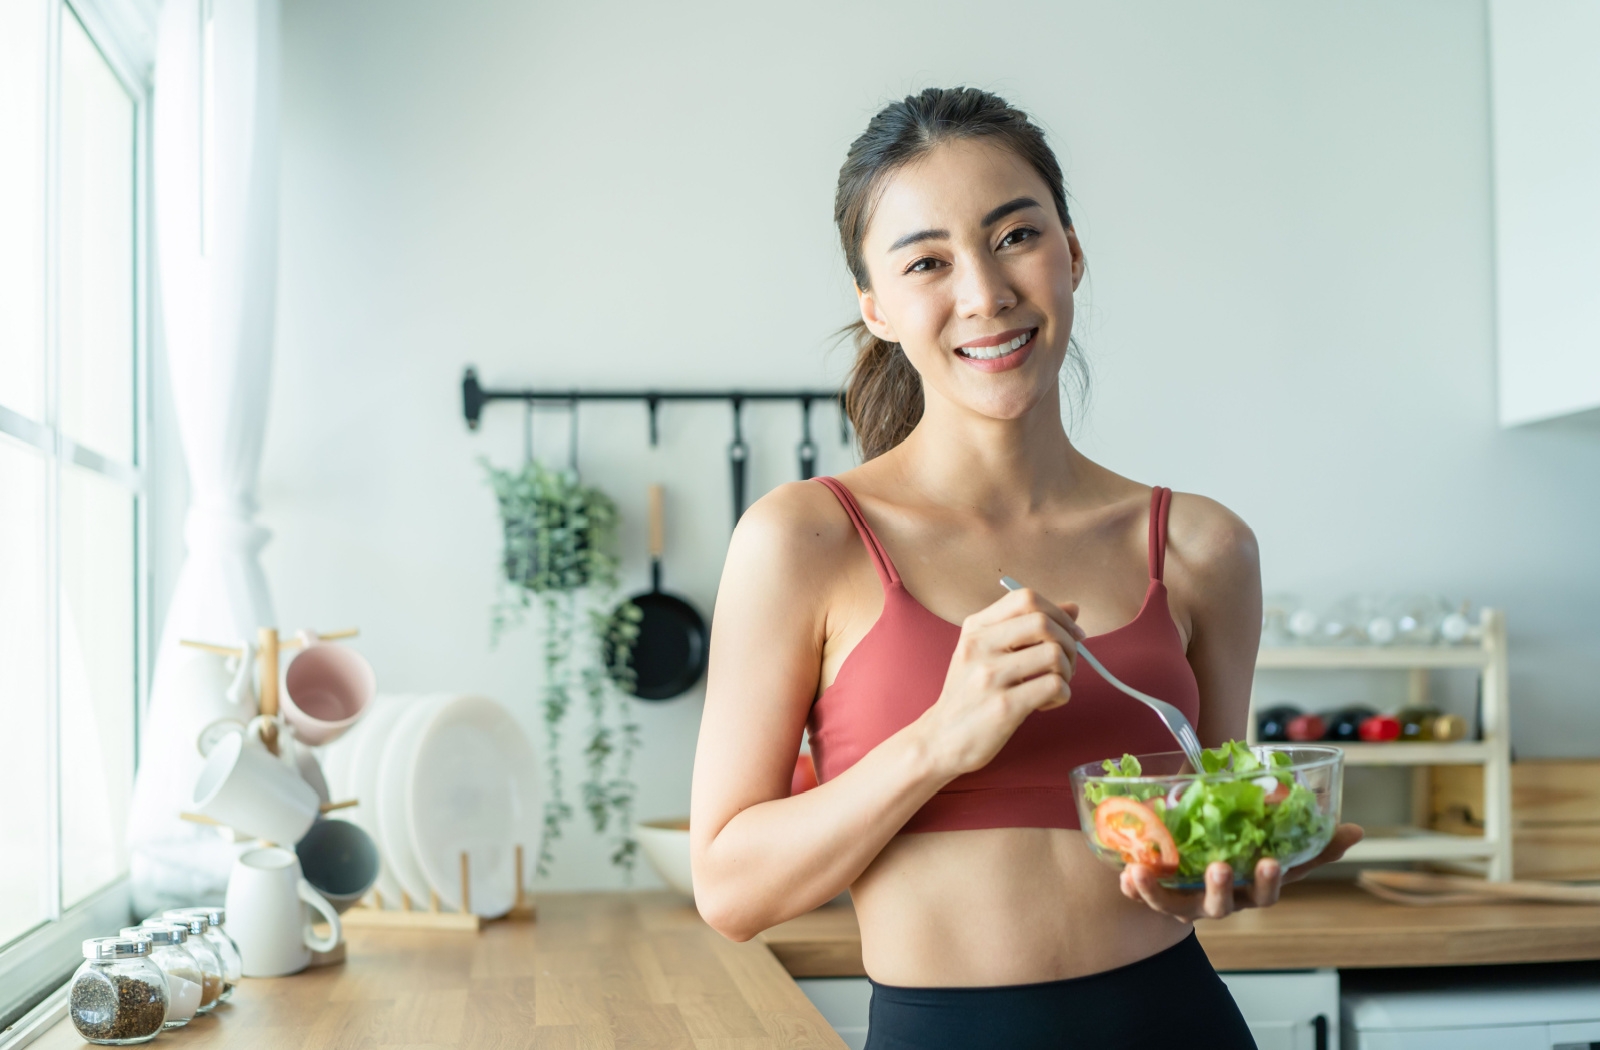 A fit young woman holding a bowl of salad on her left hand smiling and looking directly at the camera.
